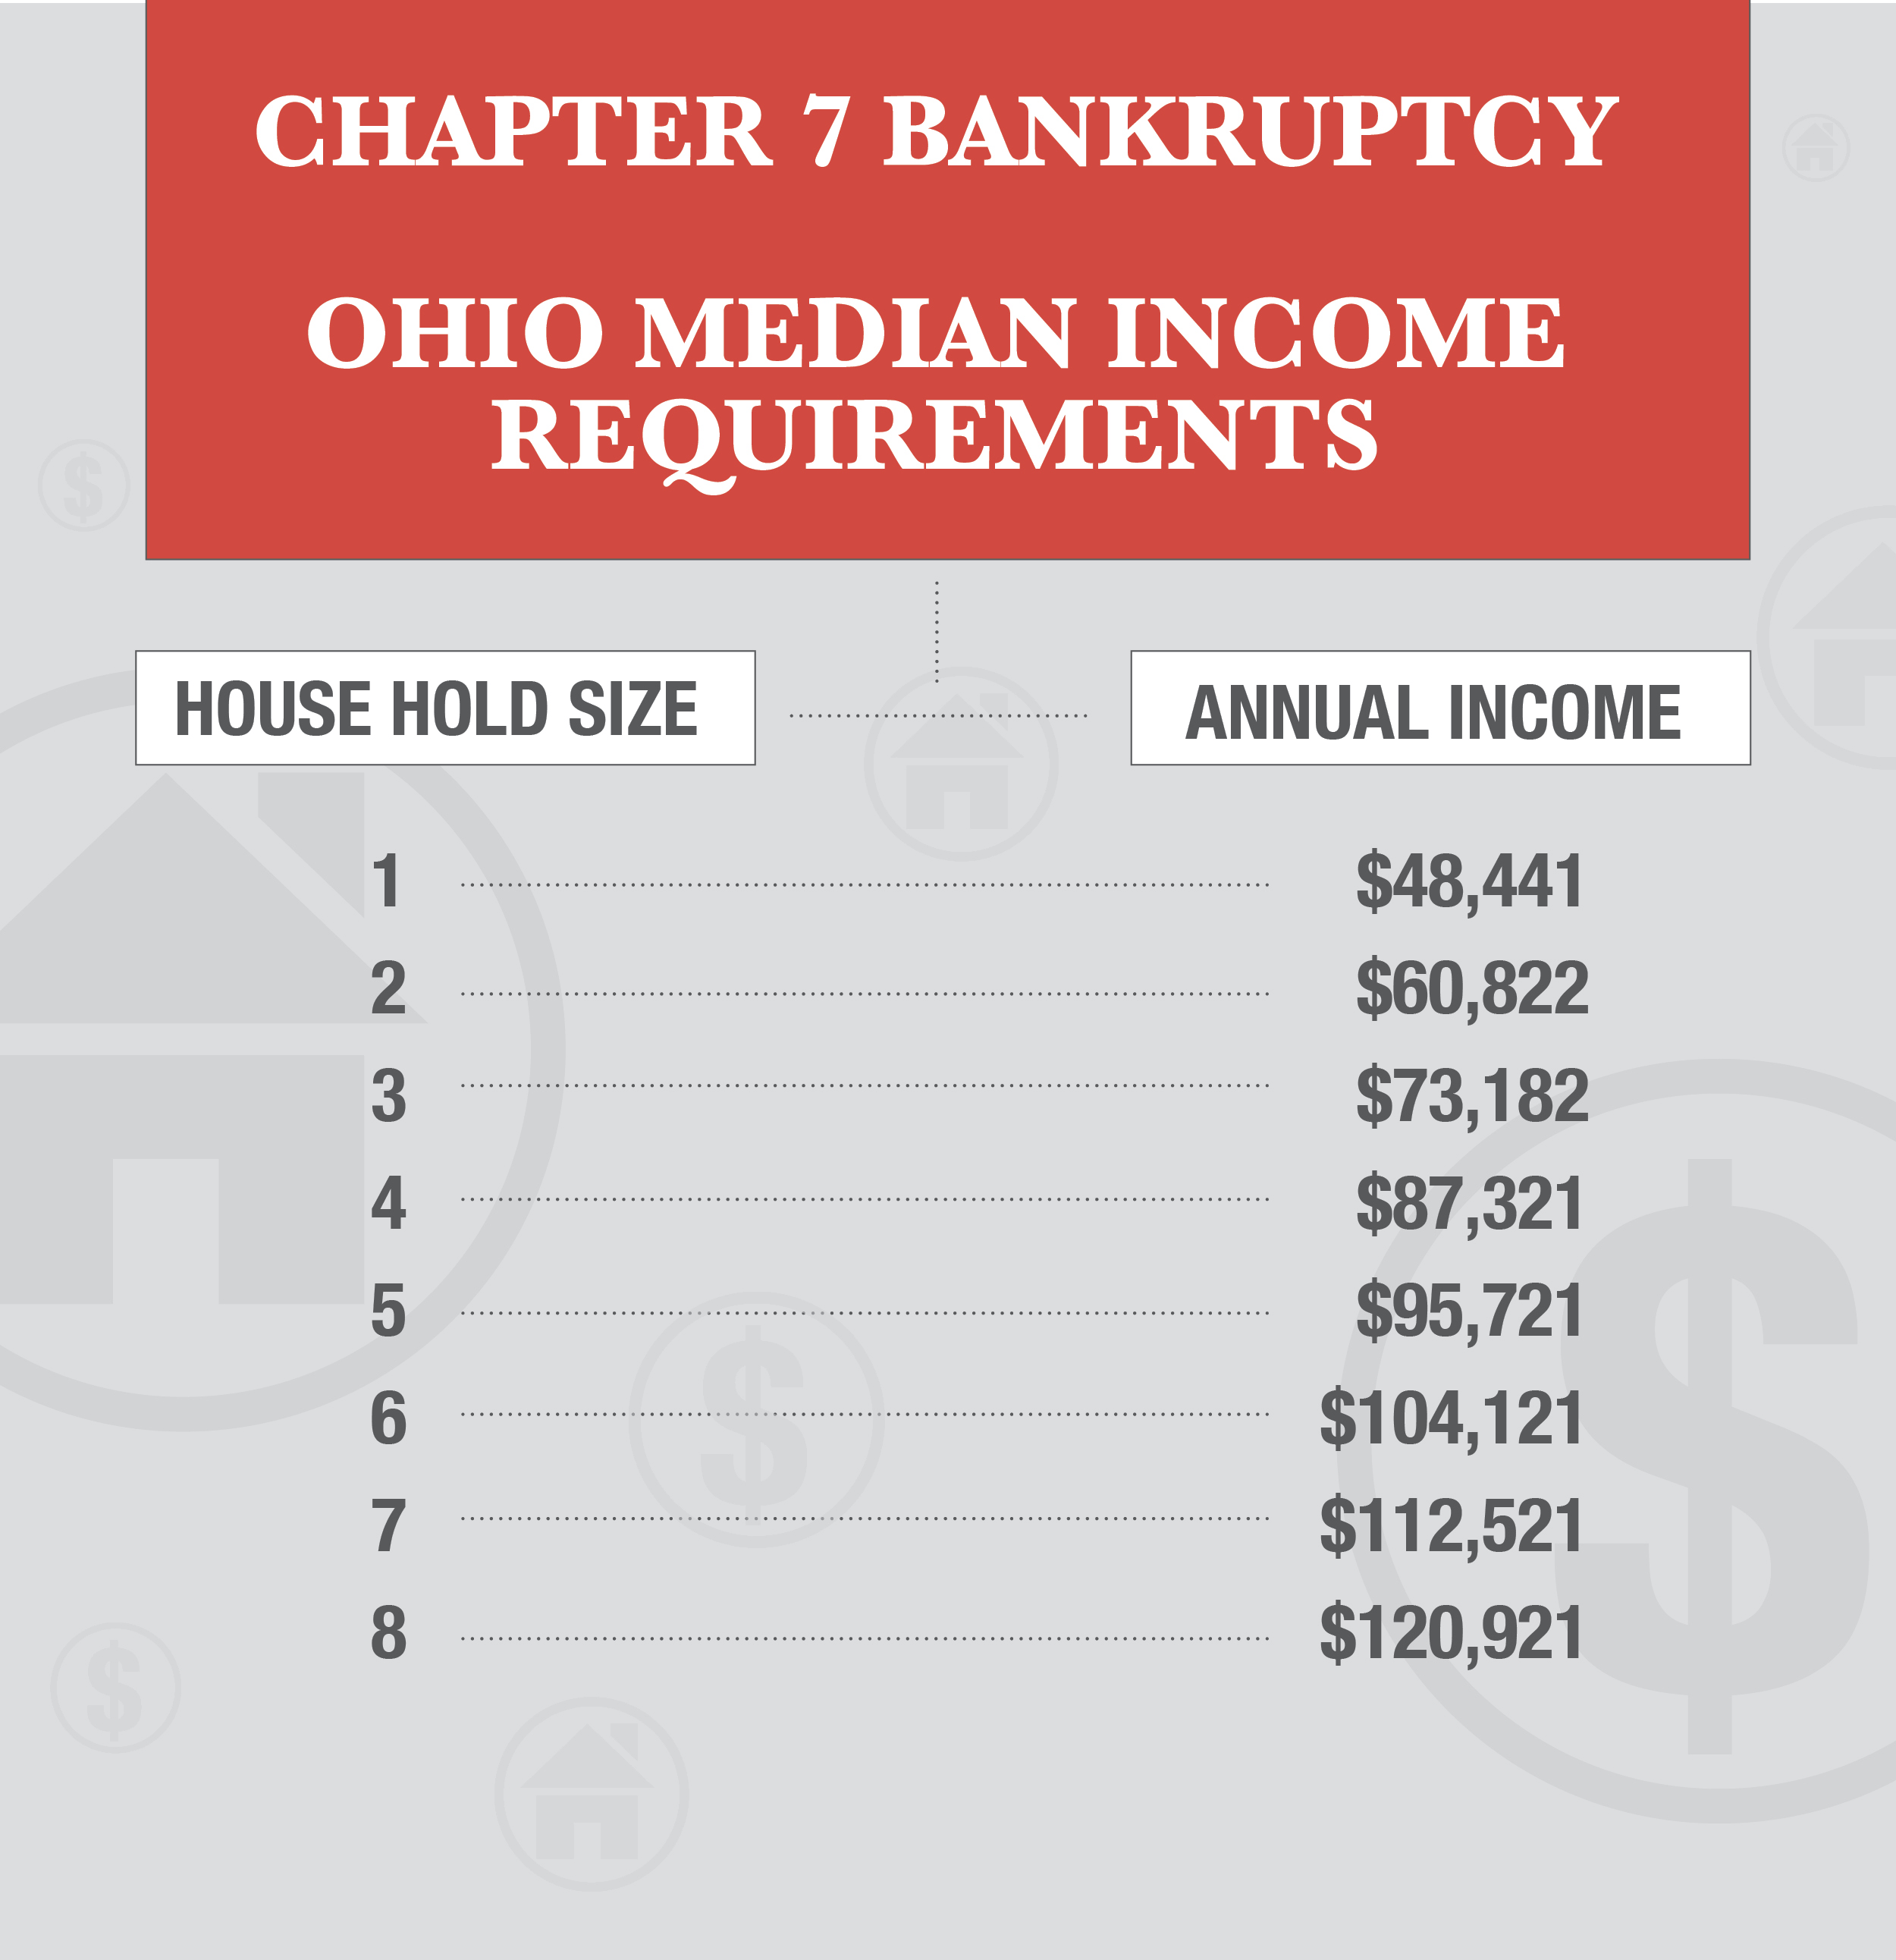 Ohio annual income requirements for Chapter 7 Bankruptcy